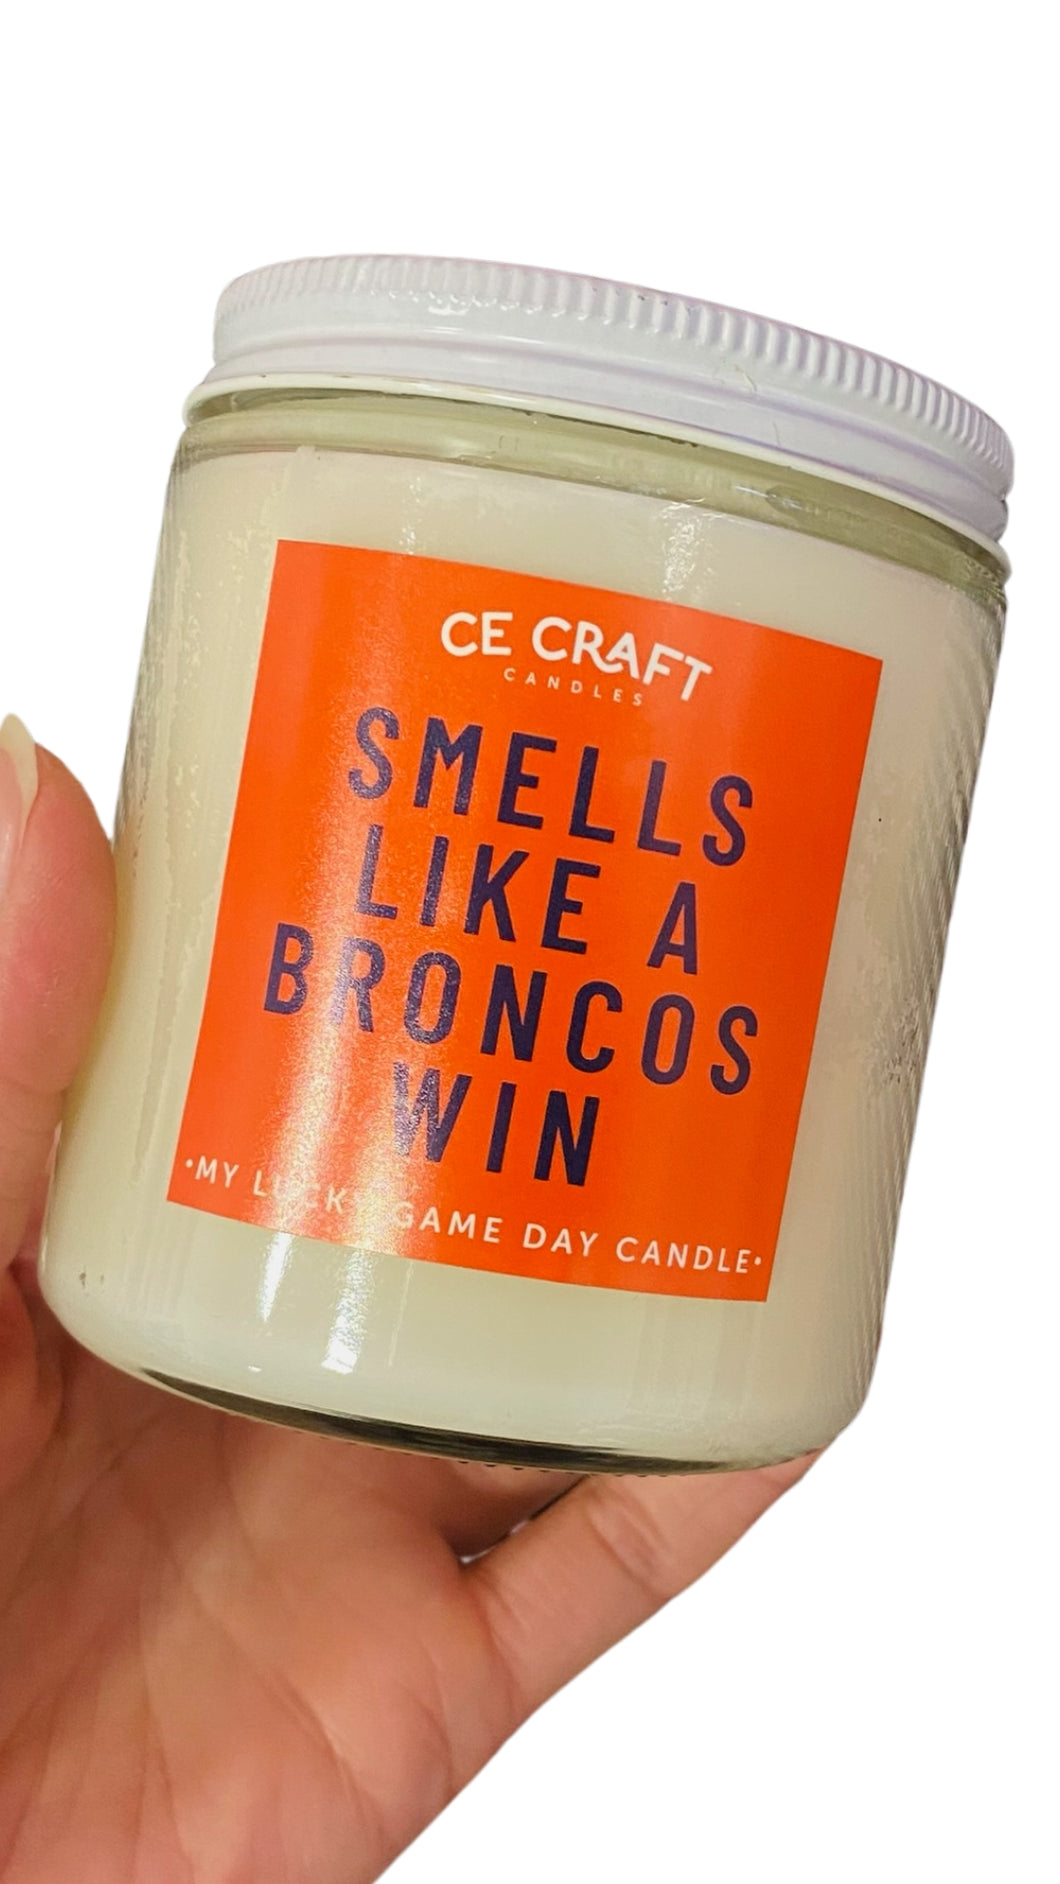 Smells Like a Broncos Win Candle